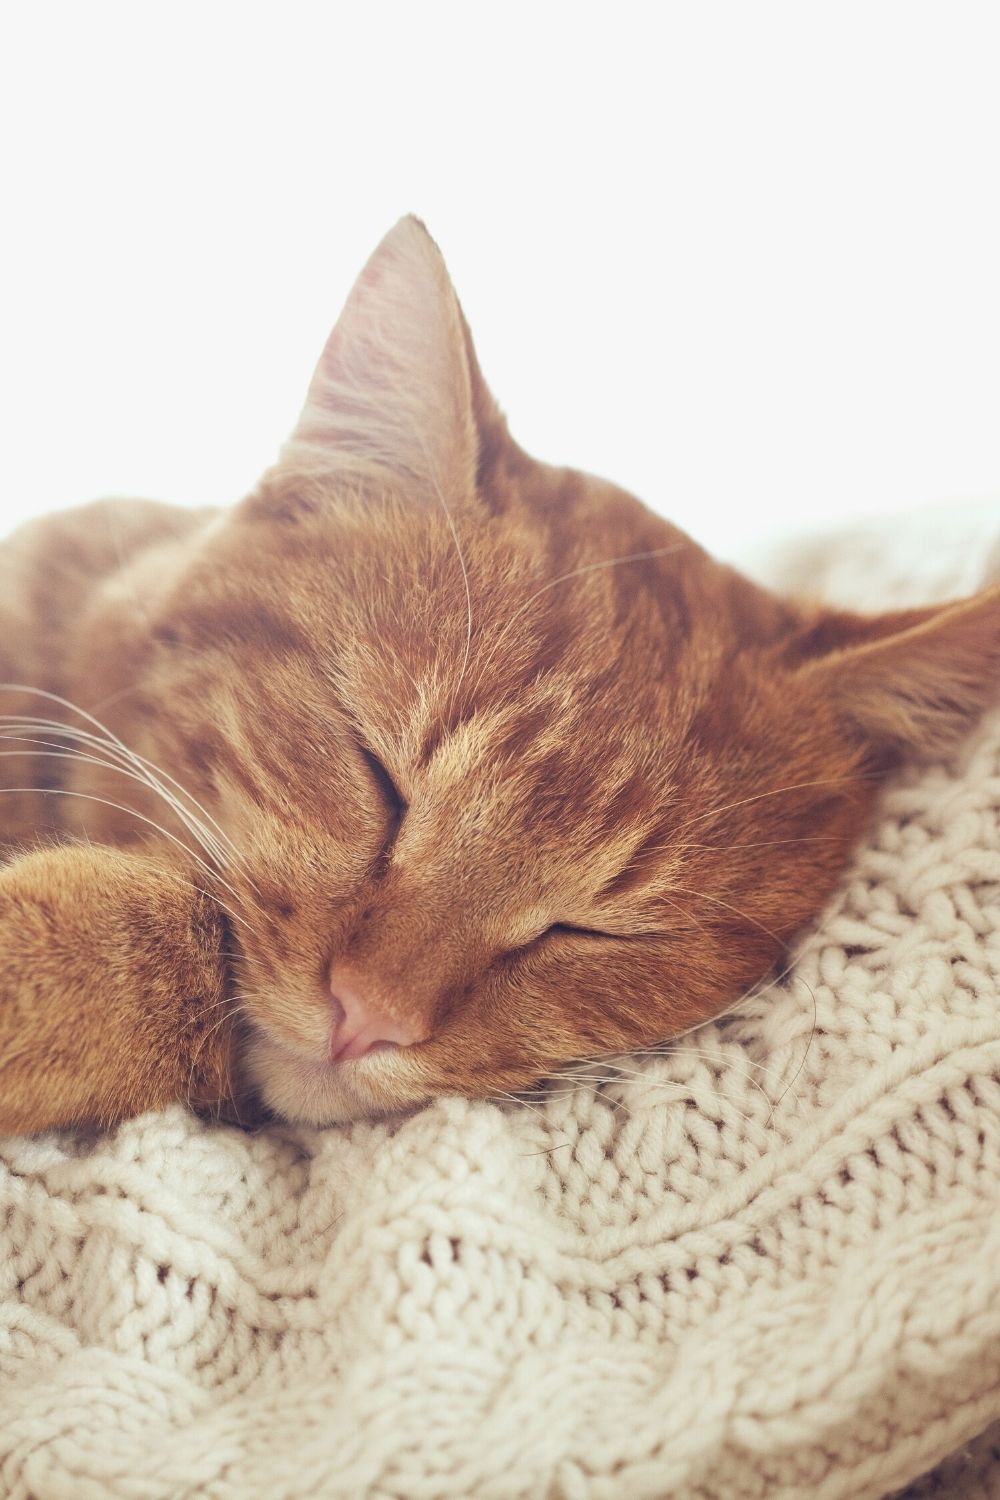 Cats twitch their ears slightly during sleep, indicating the level of sleep they are in